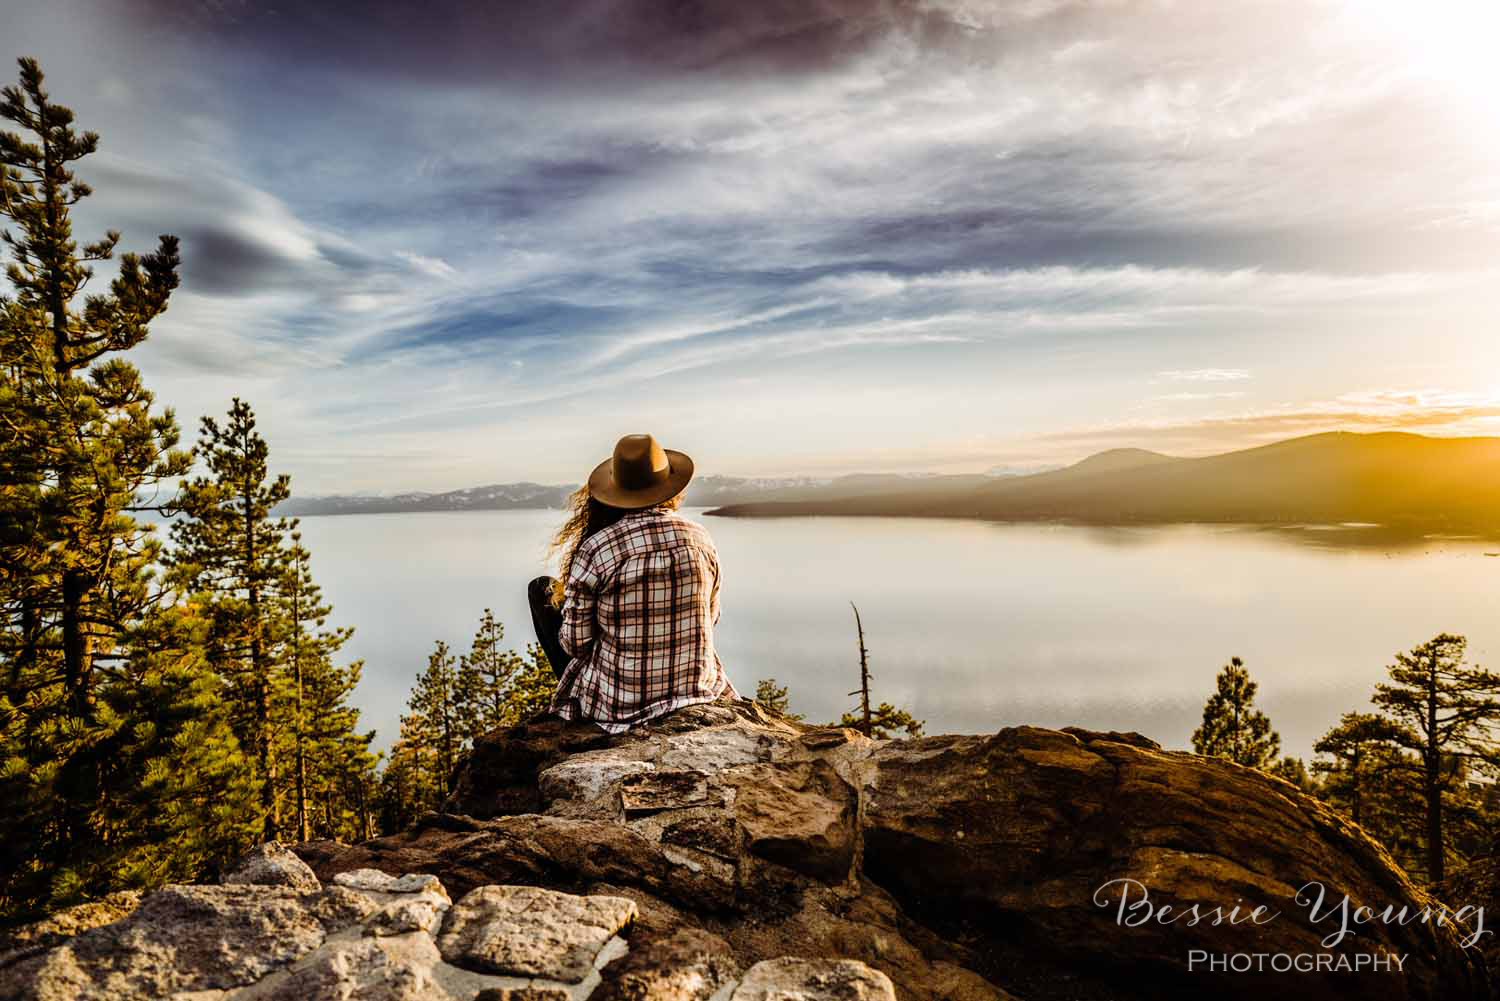 Tahoe Lake Photograph by Bessie Young Photography 2018 - adventure photograph - travel photograph - rustic home inspiration - rustic living room inspiration.jpg